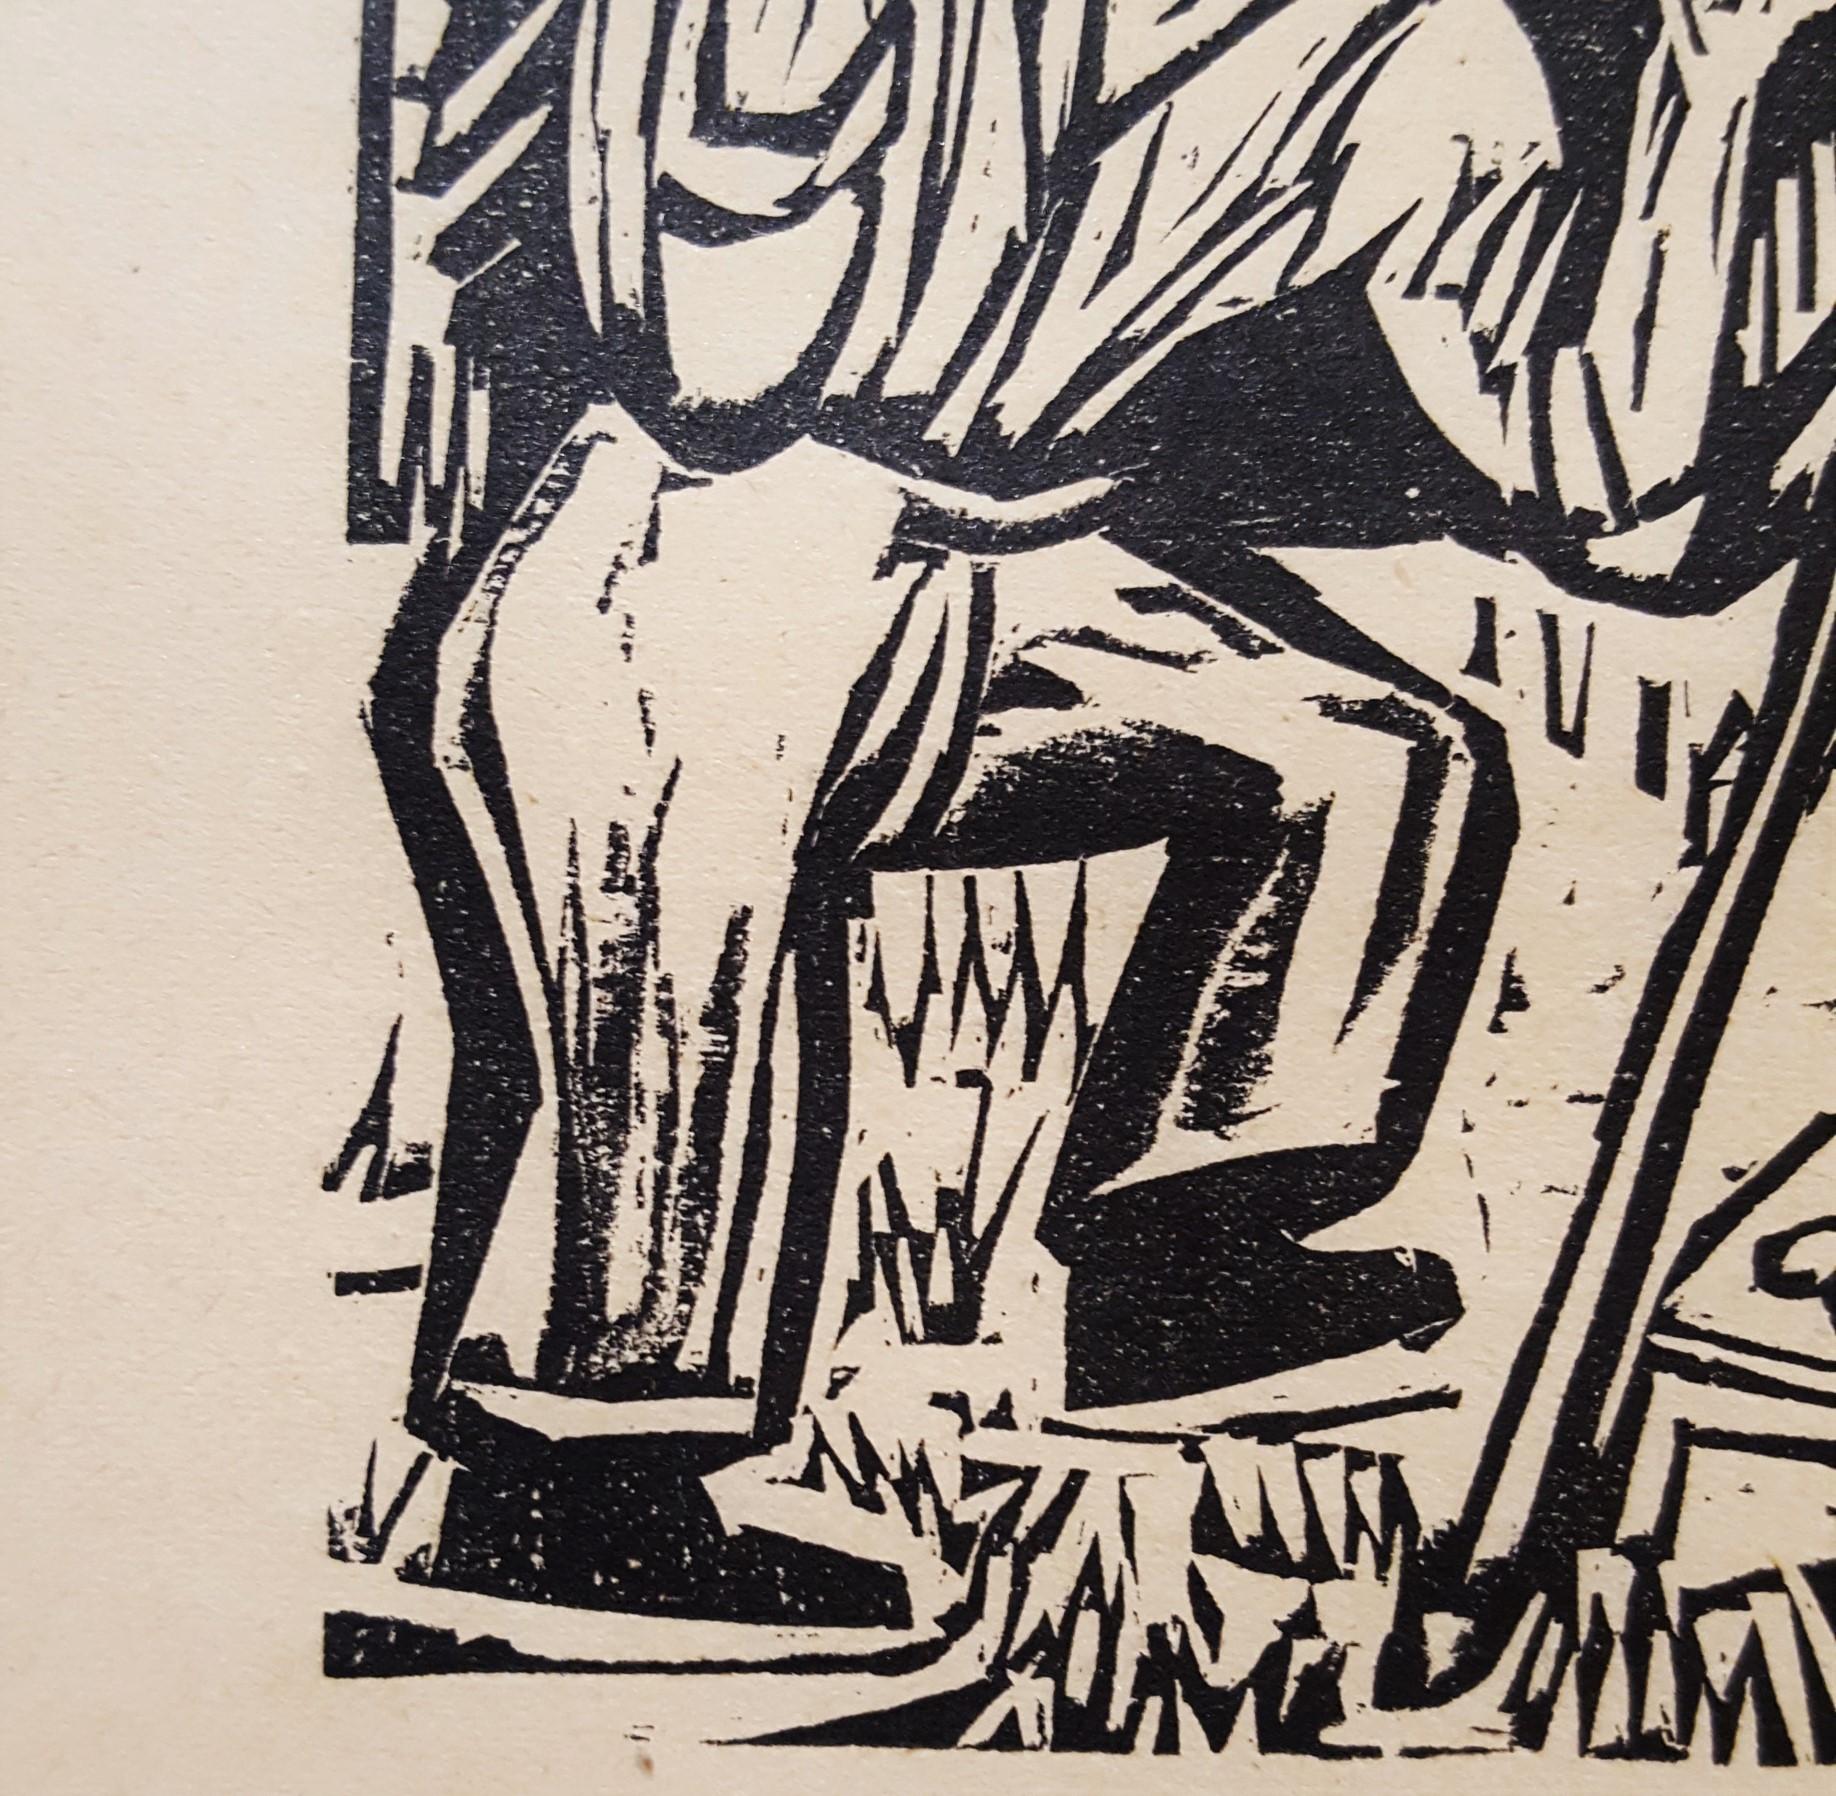 An original woodcut engraving on wove paper by German artist Ernst Ludwig Kirchner (1880-1938) titled 